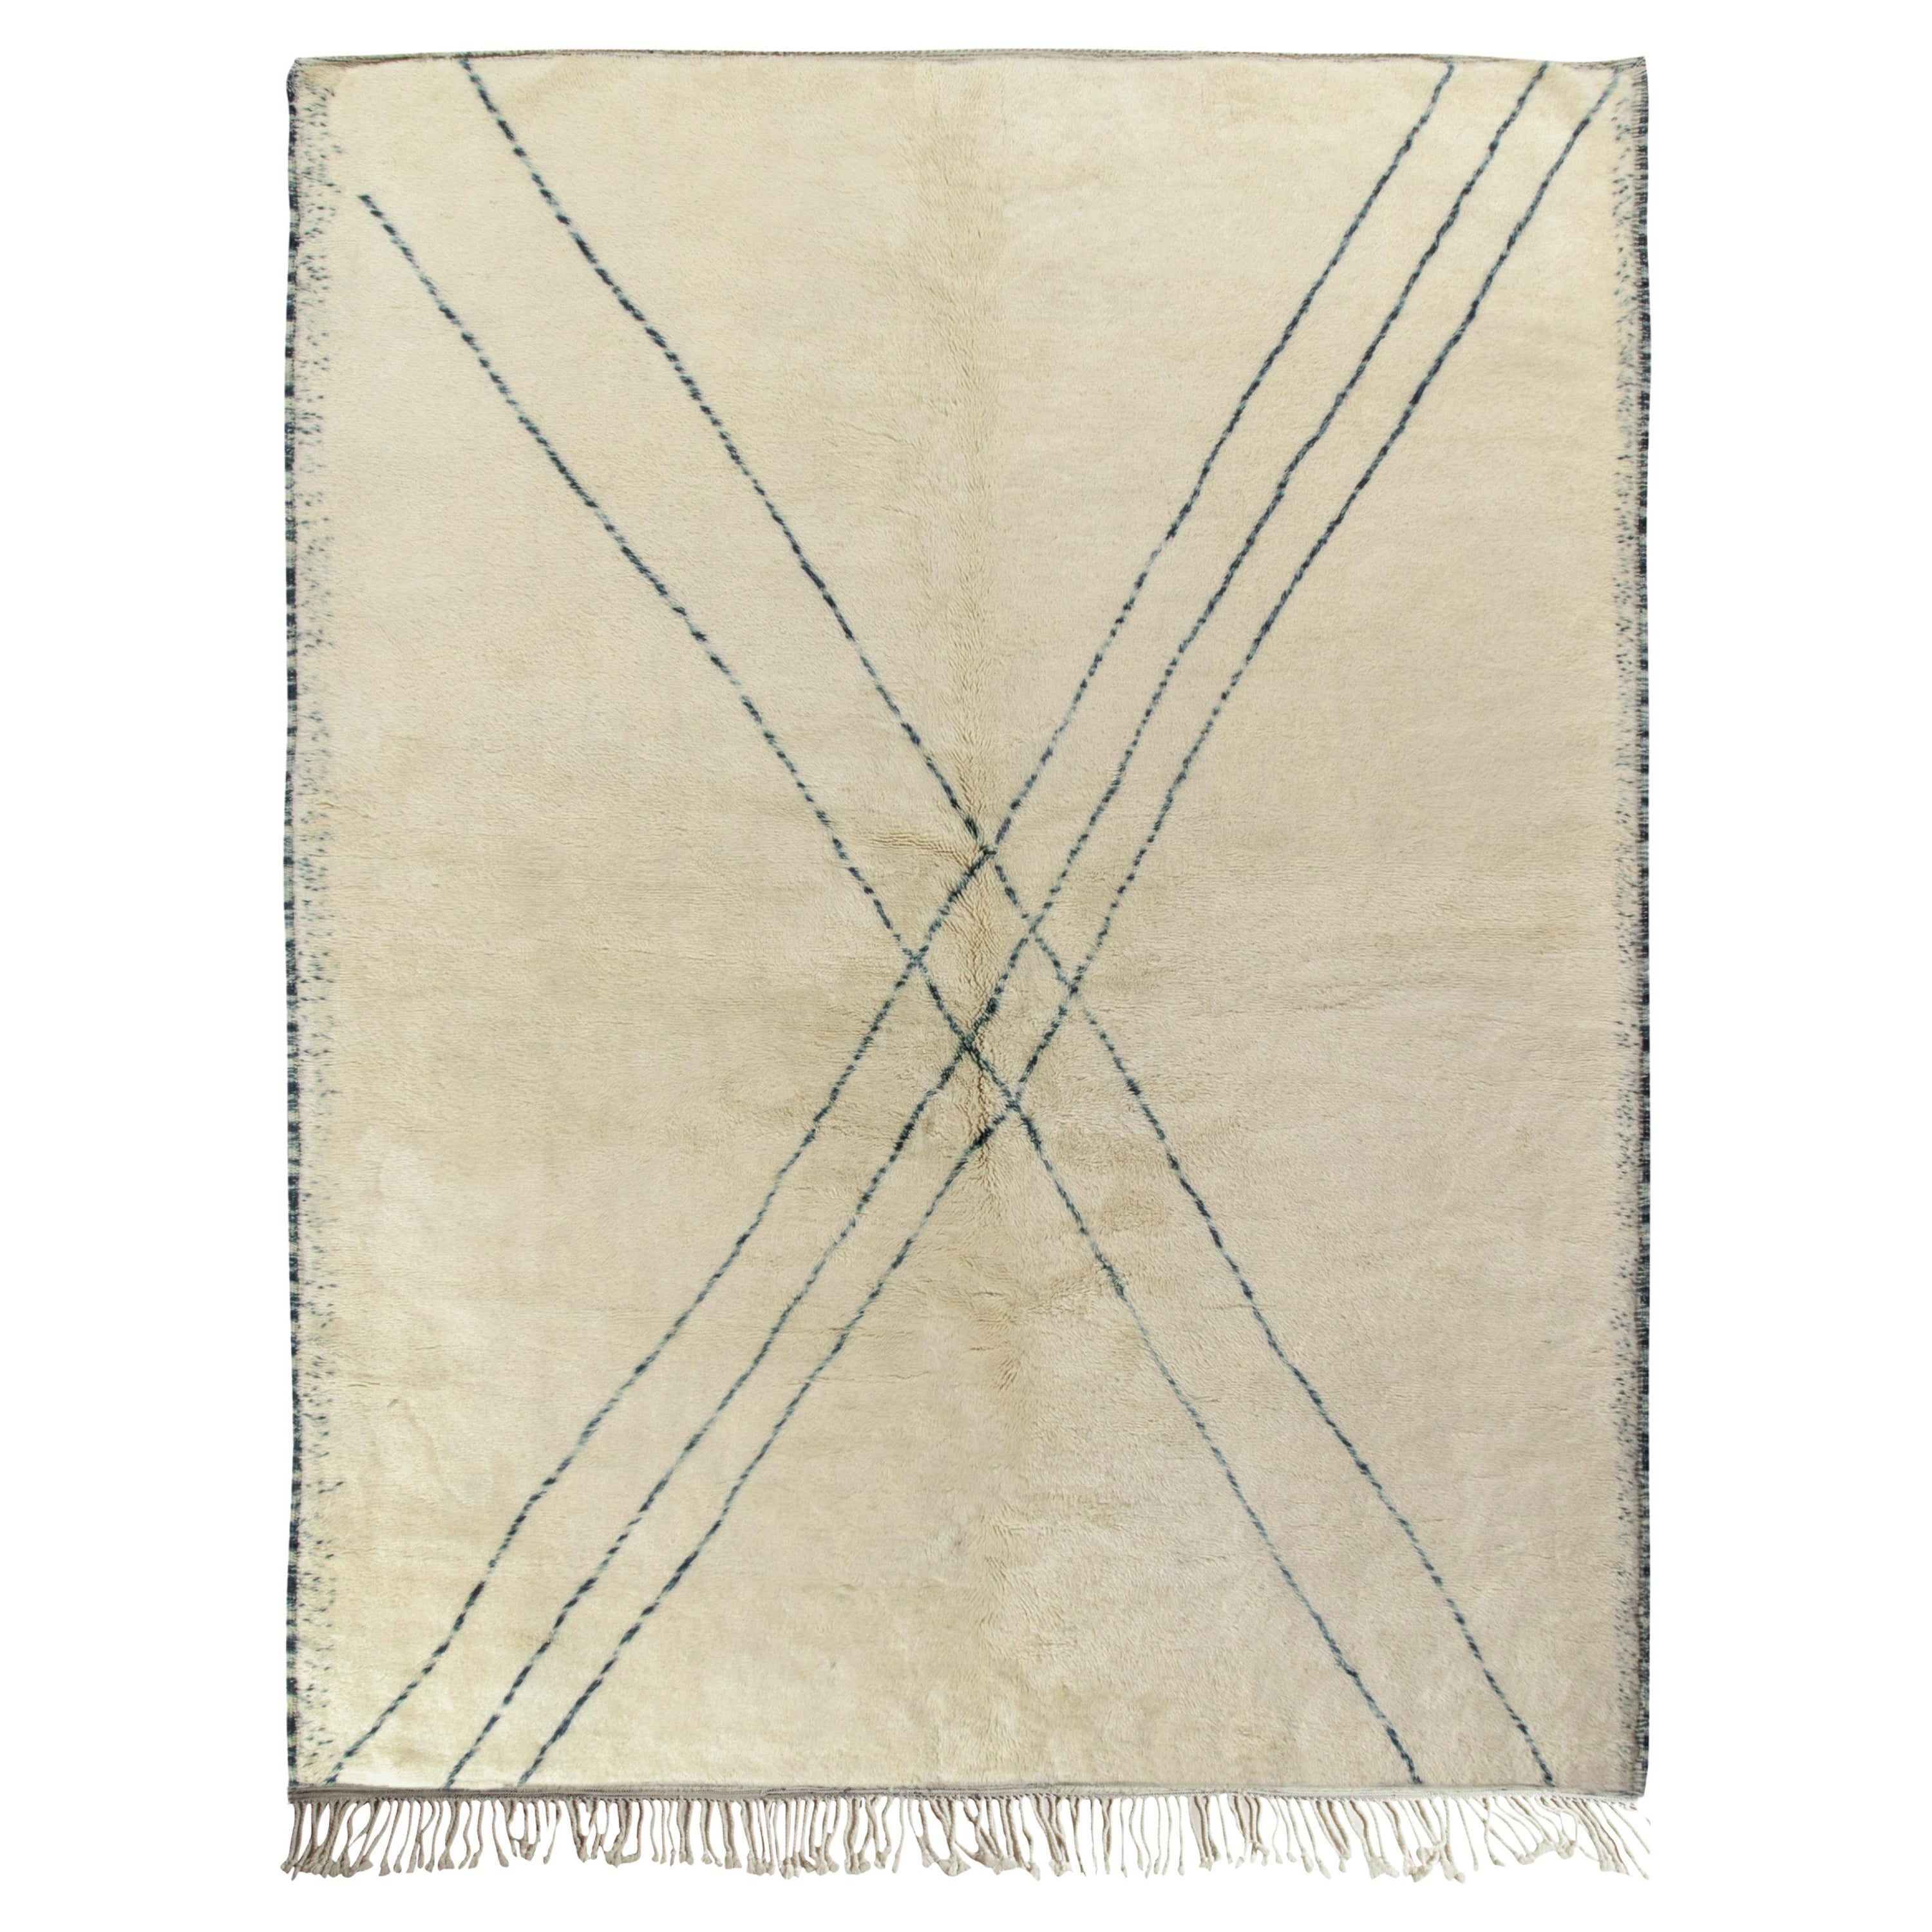 Rug & Kilim’s Contemporary Moroccan Rug in Beige-White, Blue Geometric Pattern